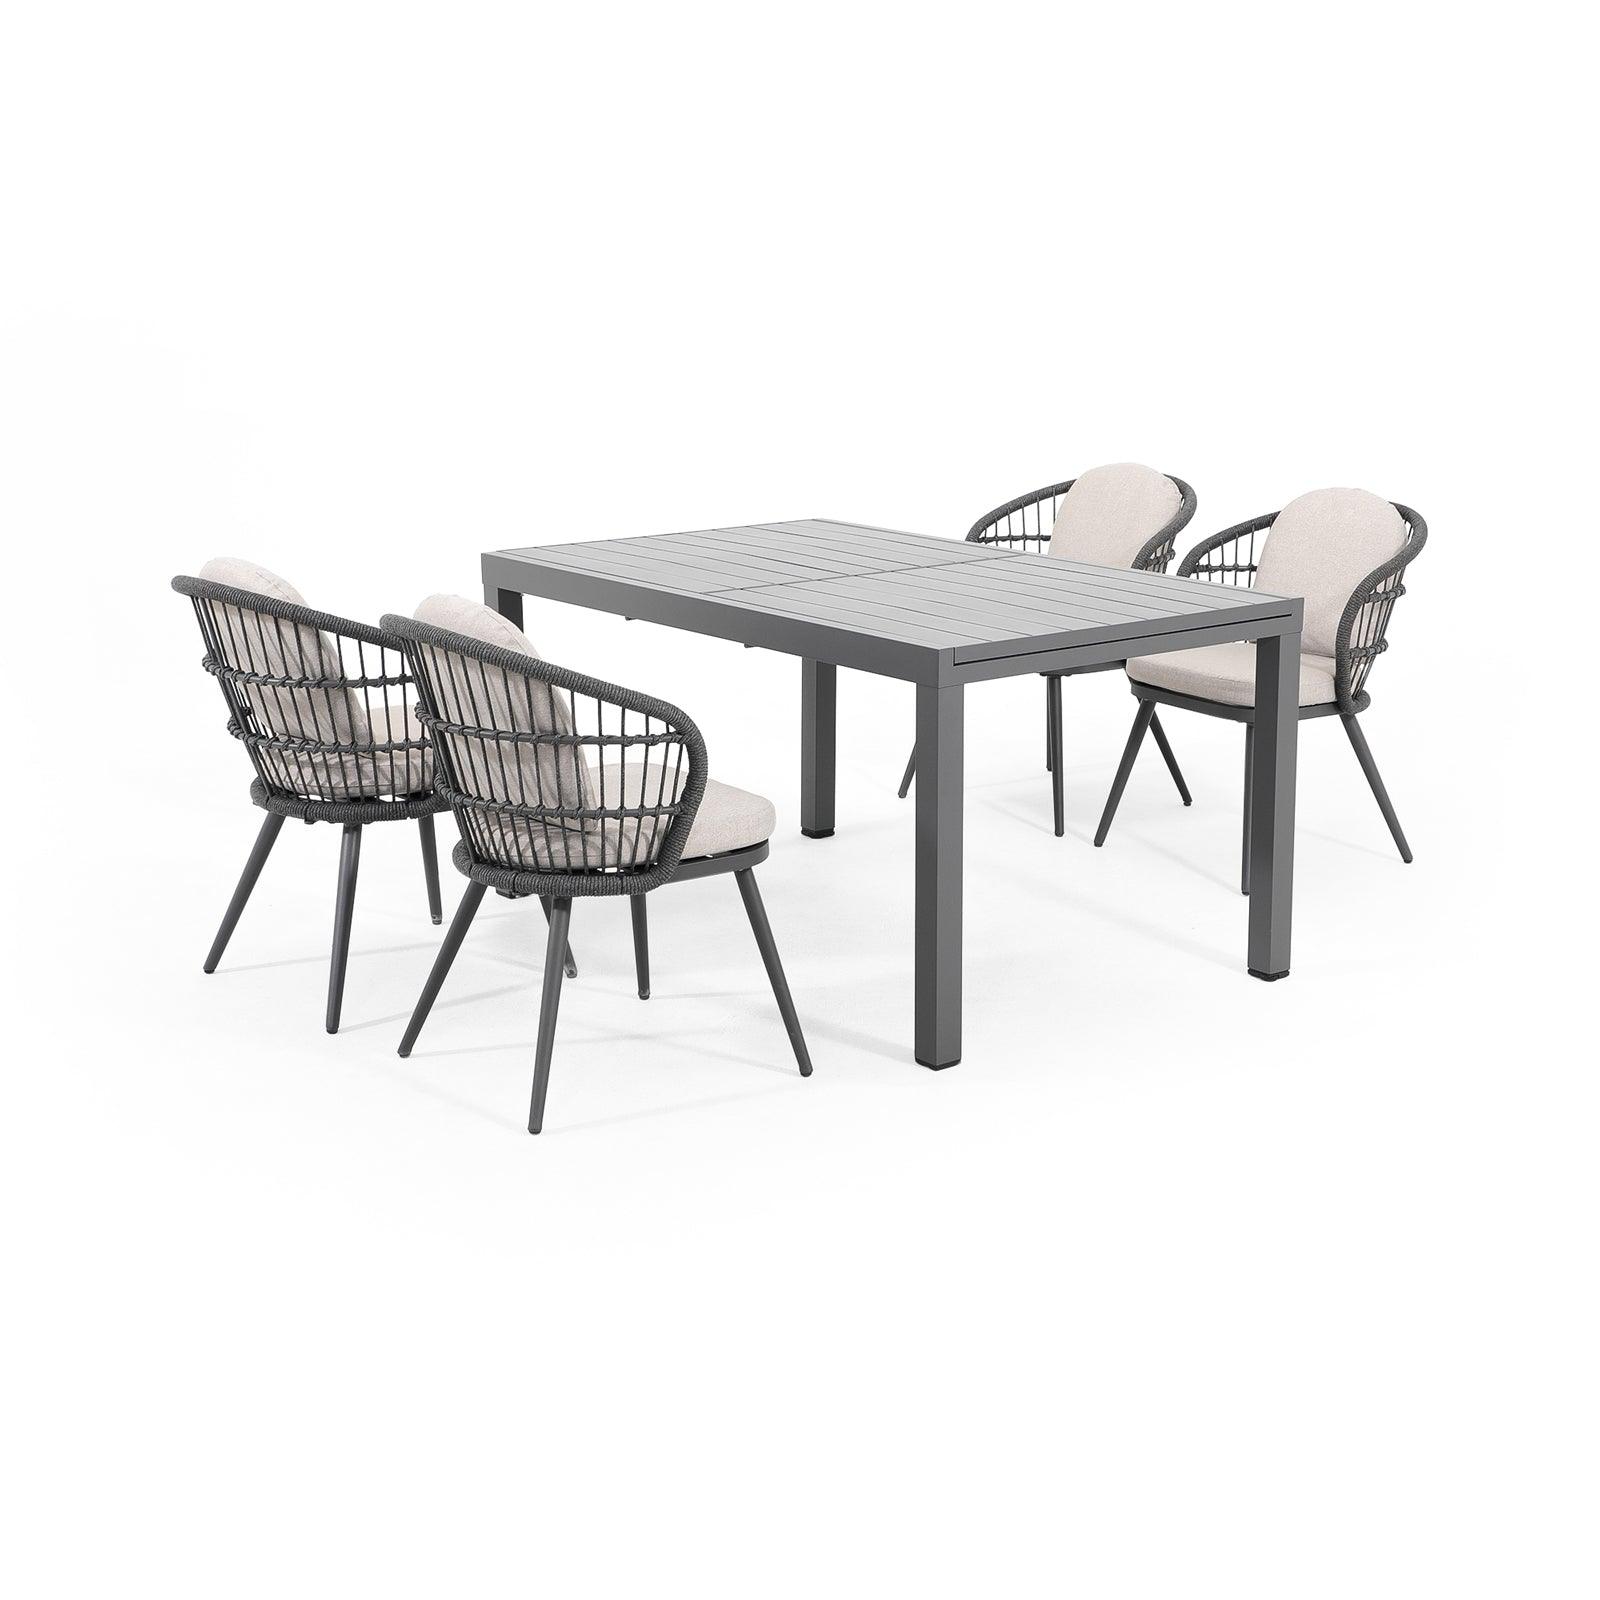 Comino dark grey aluminum outdoor Dining Set for 4 with light grey cushions, 4 dining seats with backrest rope design, 1 extendable rectangle aluminum dining table - Jardina Furniture#Pieces_5-pc.